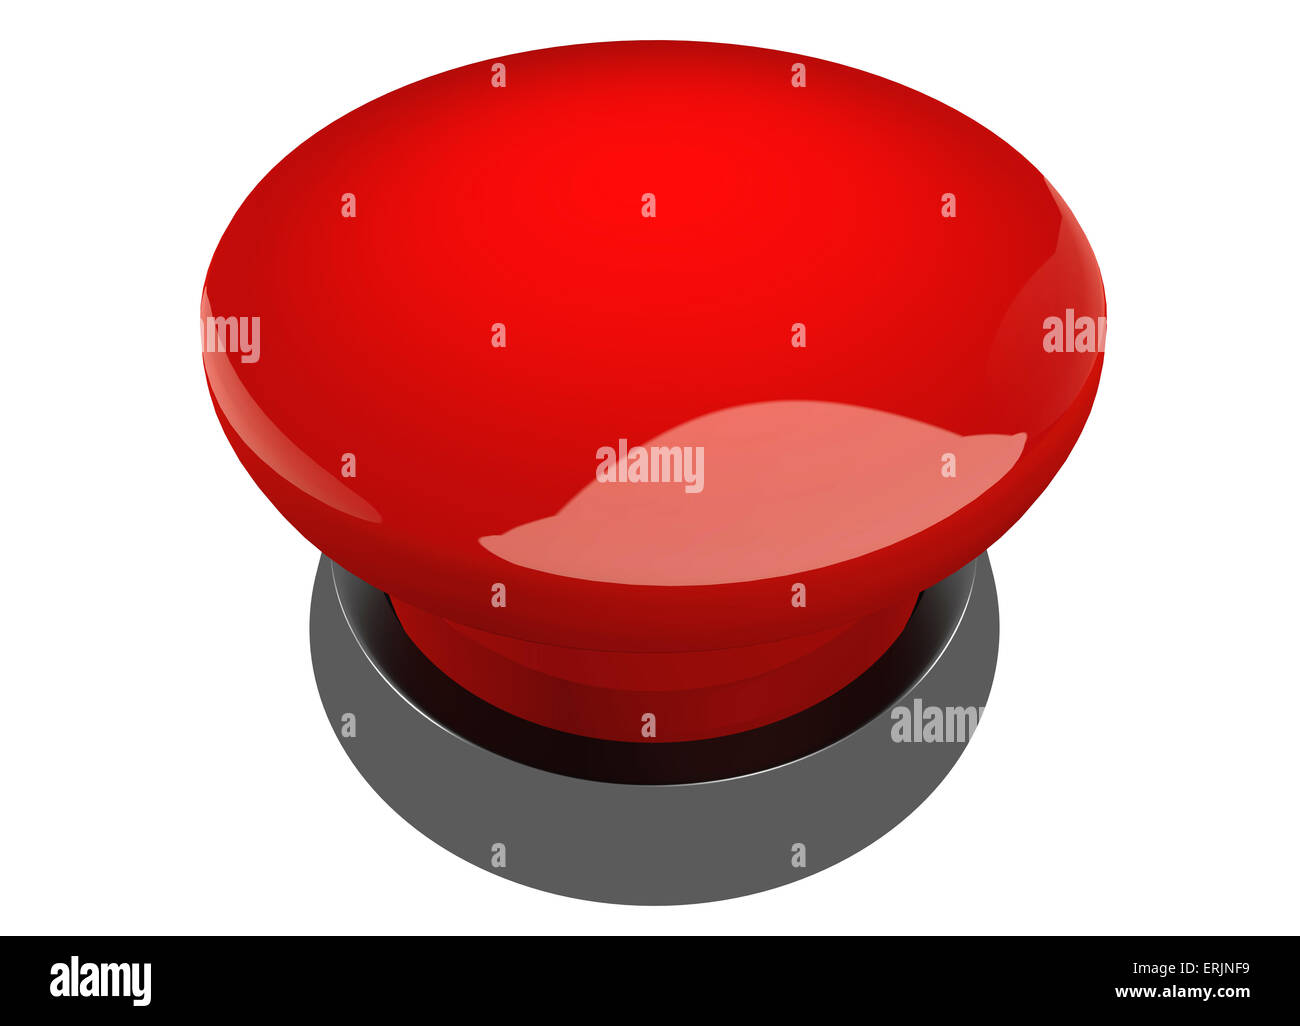 Do Not Press Red Button Stock Photo - Alamy